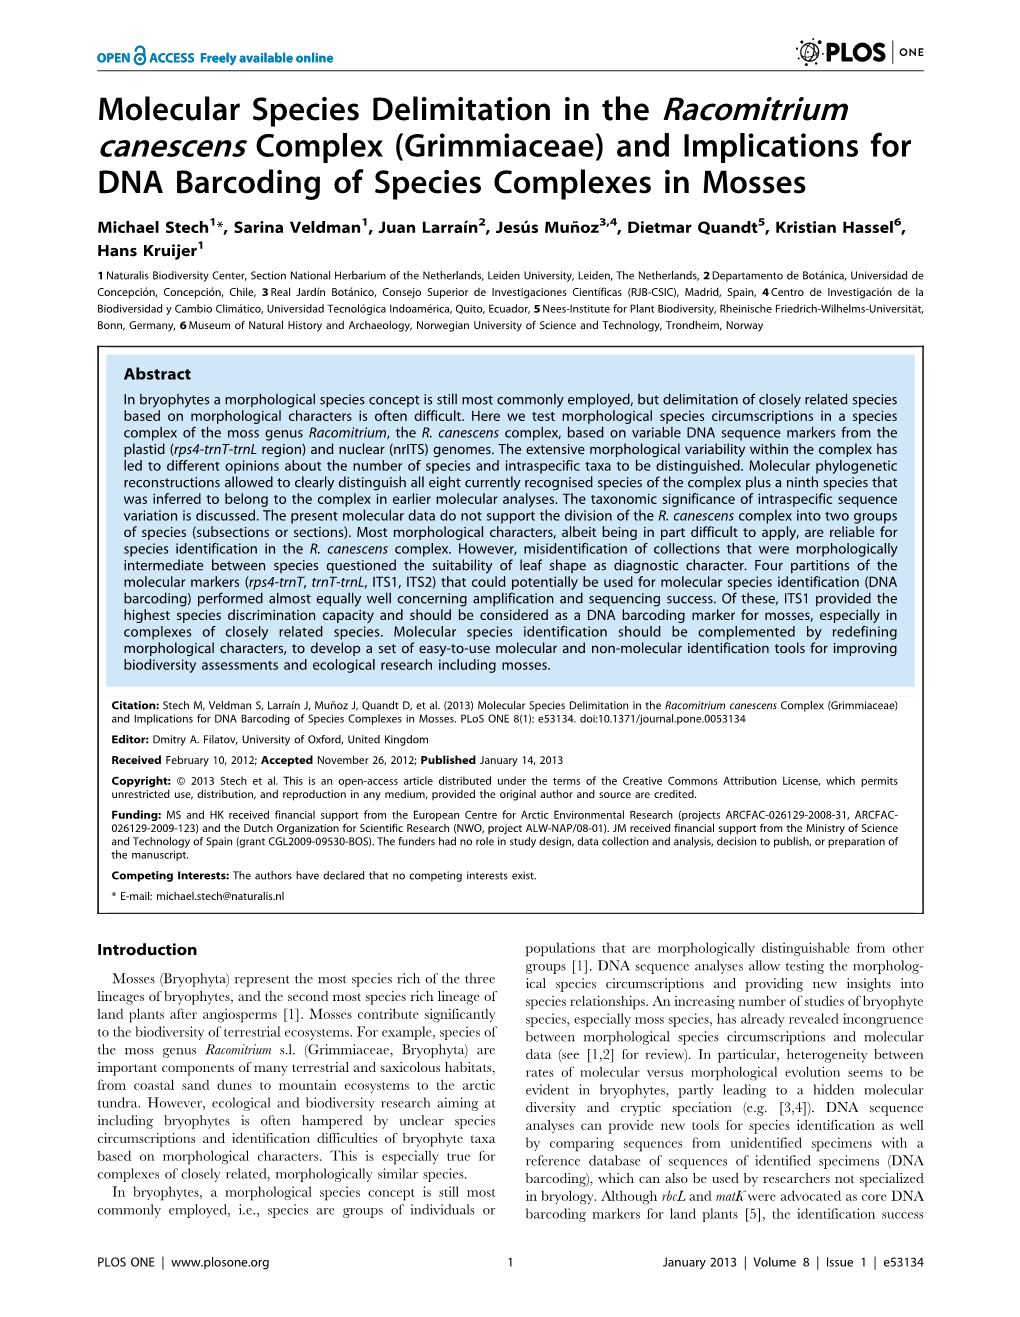 Molecular Species Delimitation in the Racomitrium Canescens Complex (Grimmiaceae) and Implications for DNA Barcoding of Species Complexes in Mosses